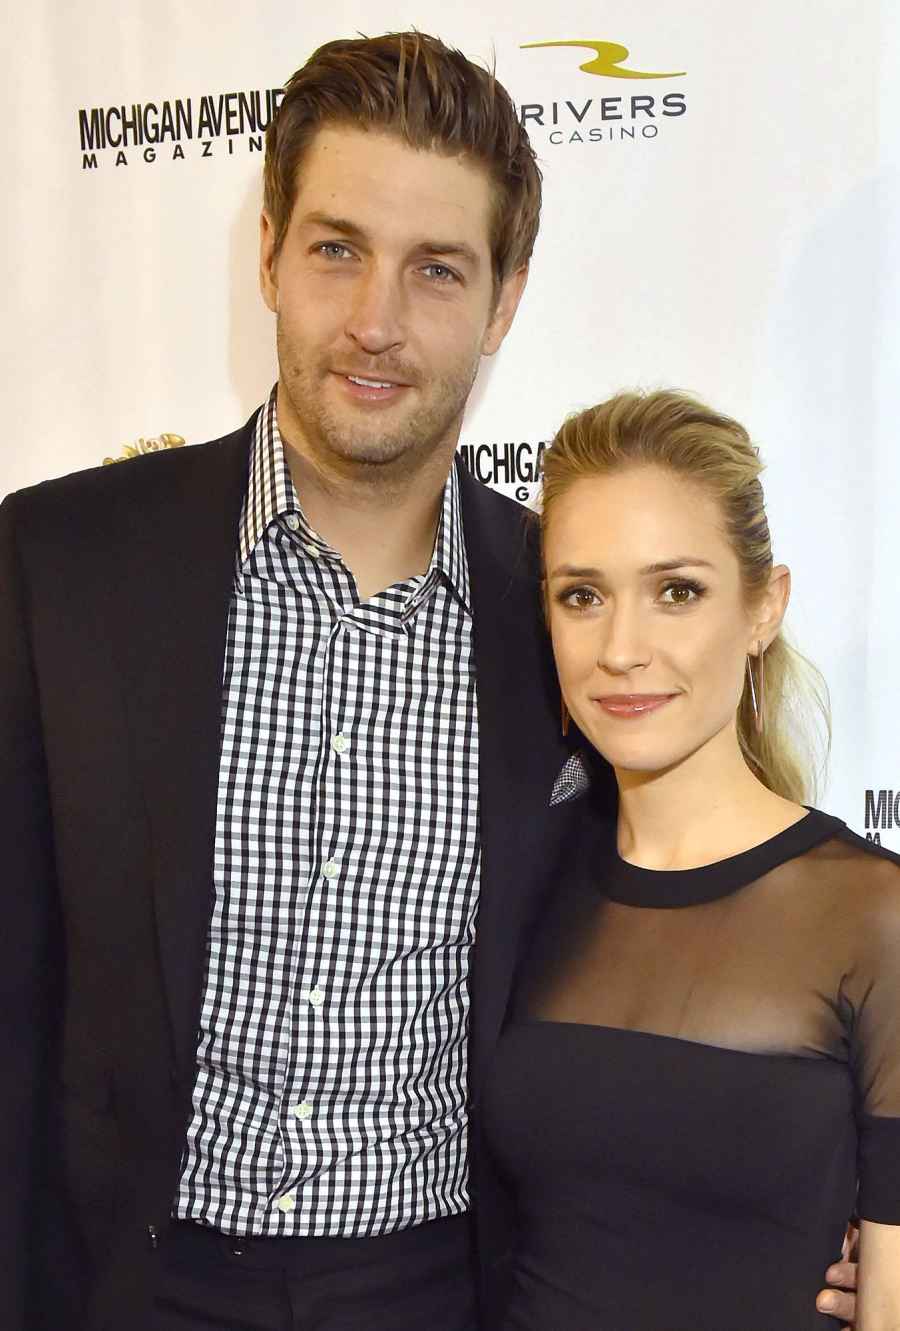 Family First Honest About Marriage Struggles Kristin Cavallari and Jay Cutler